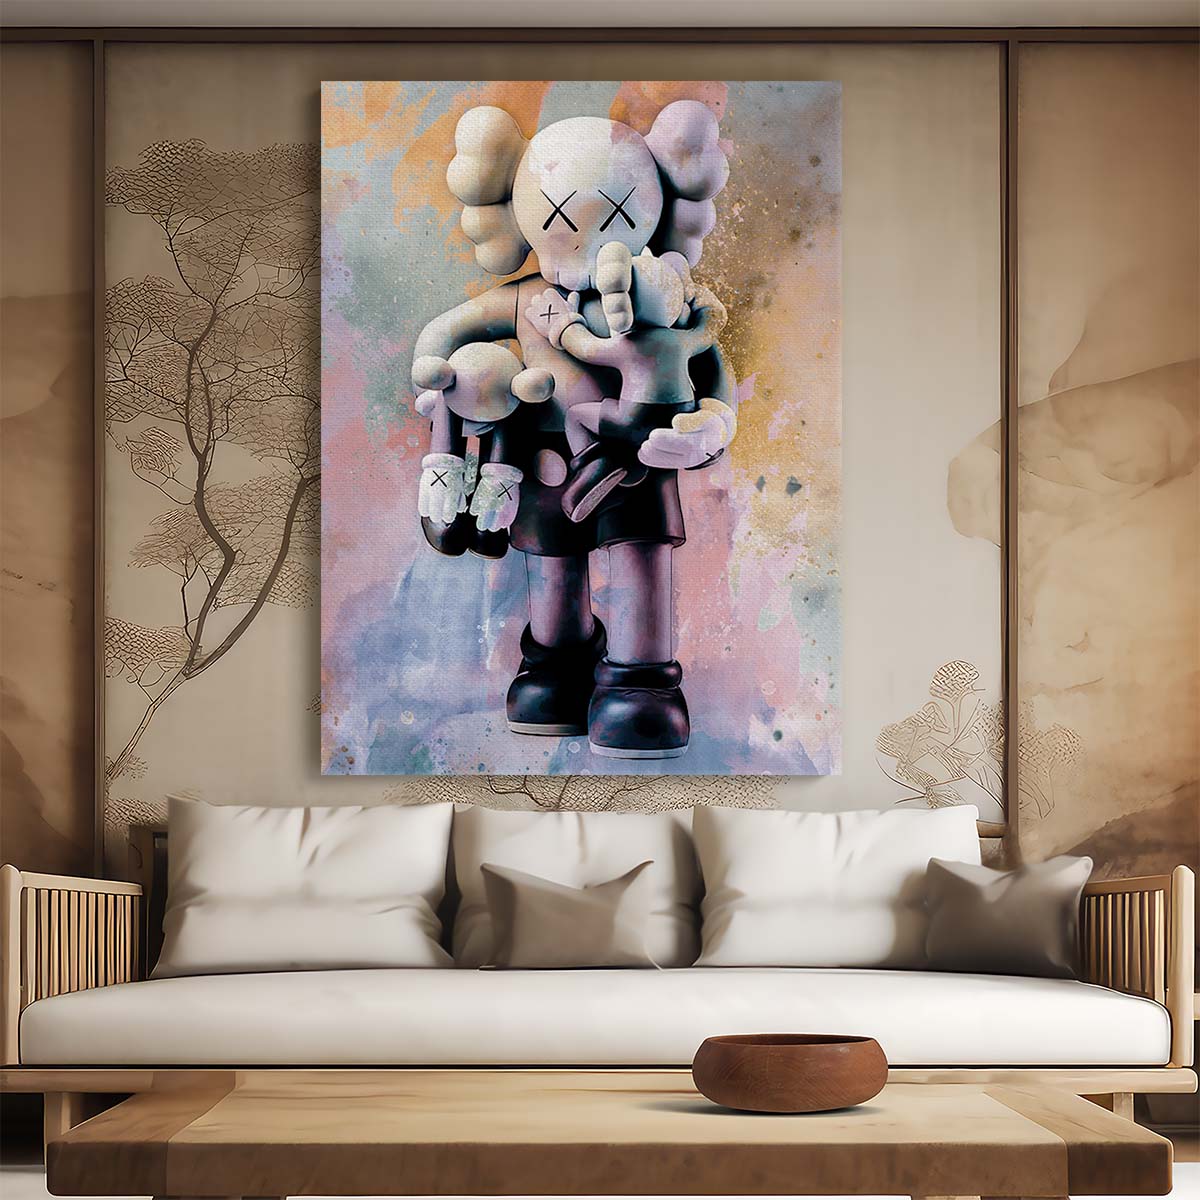 Kaws Family Wall Art by Luxuriance Designs. Made in USA.